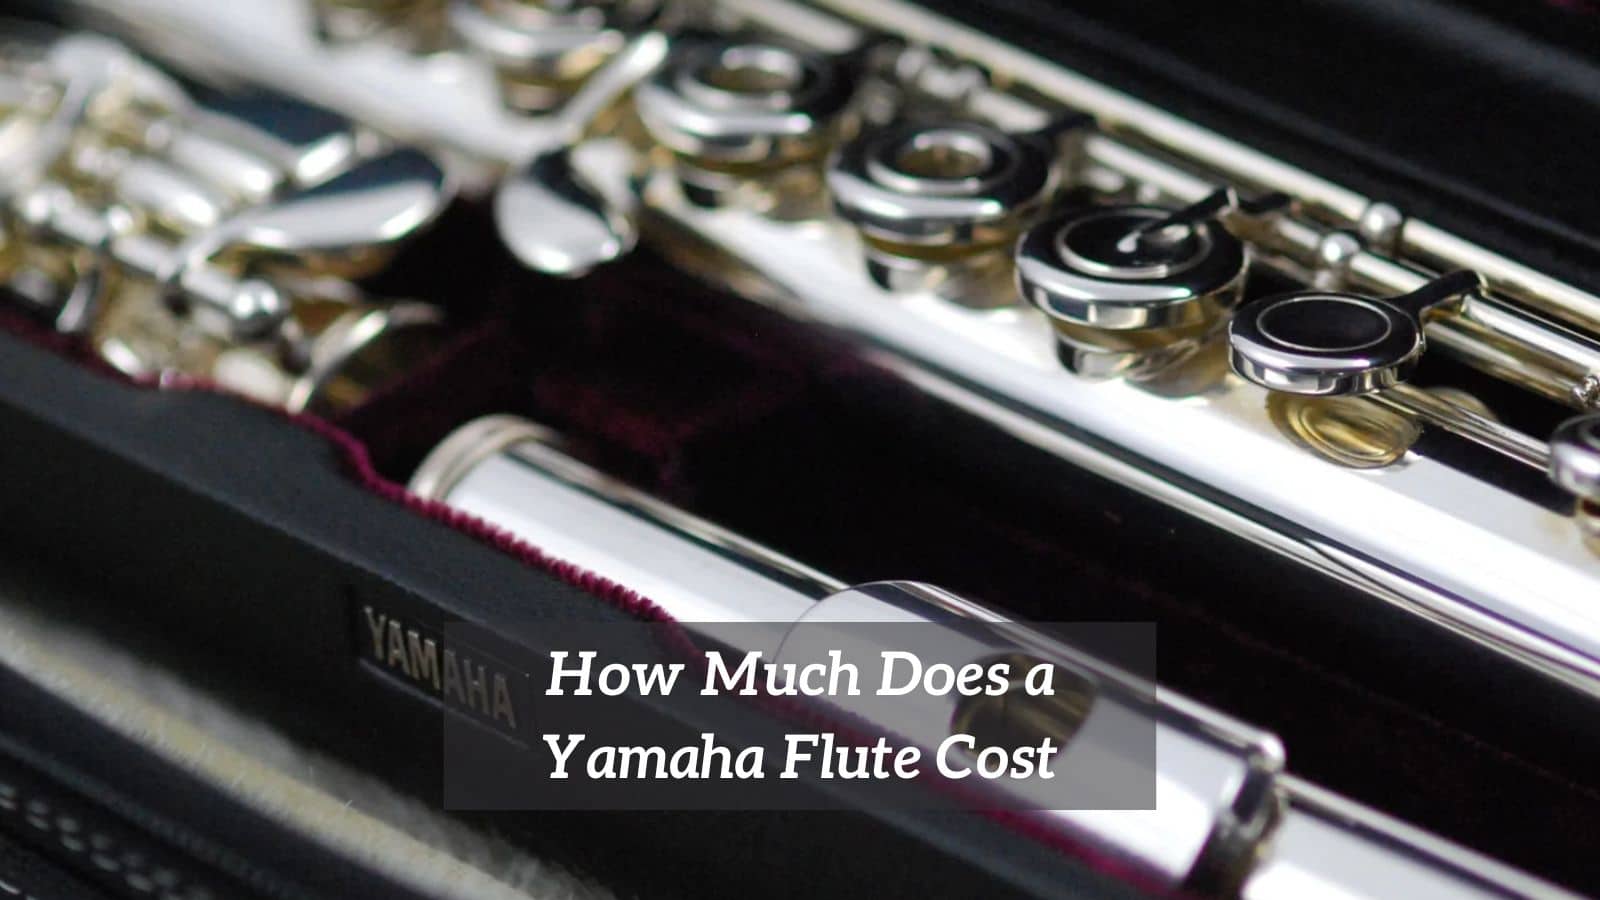 How Much Does a Yamaha Flute Cost